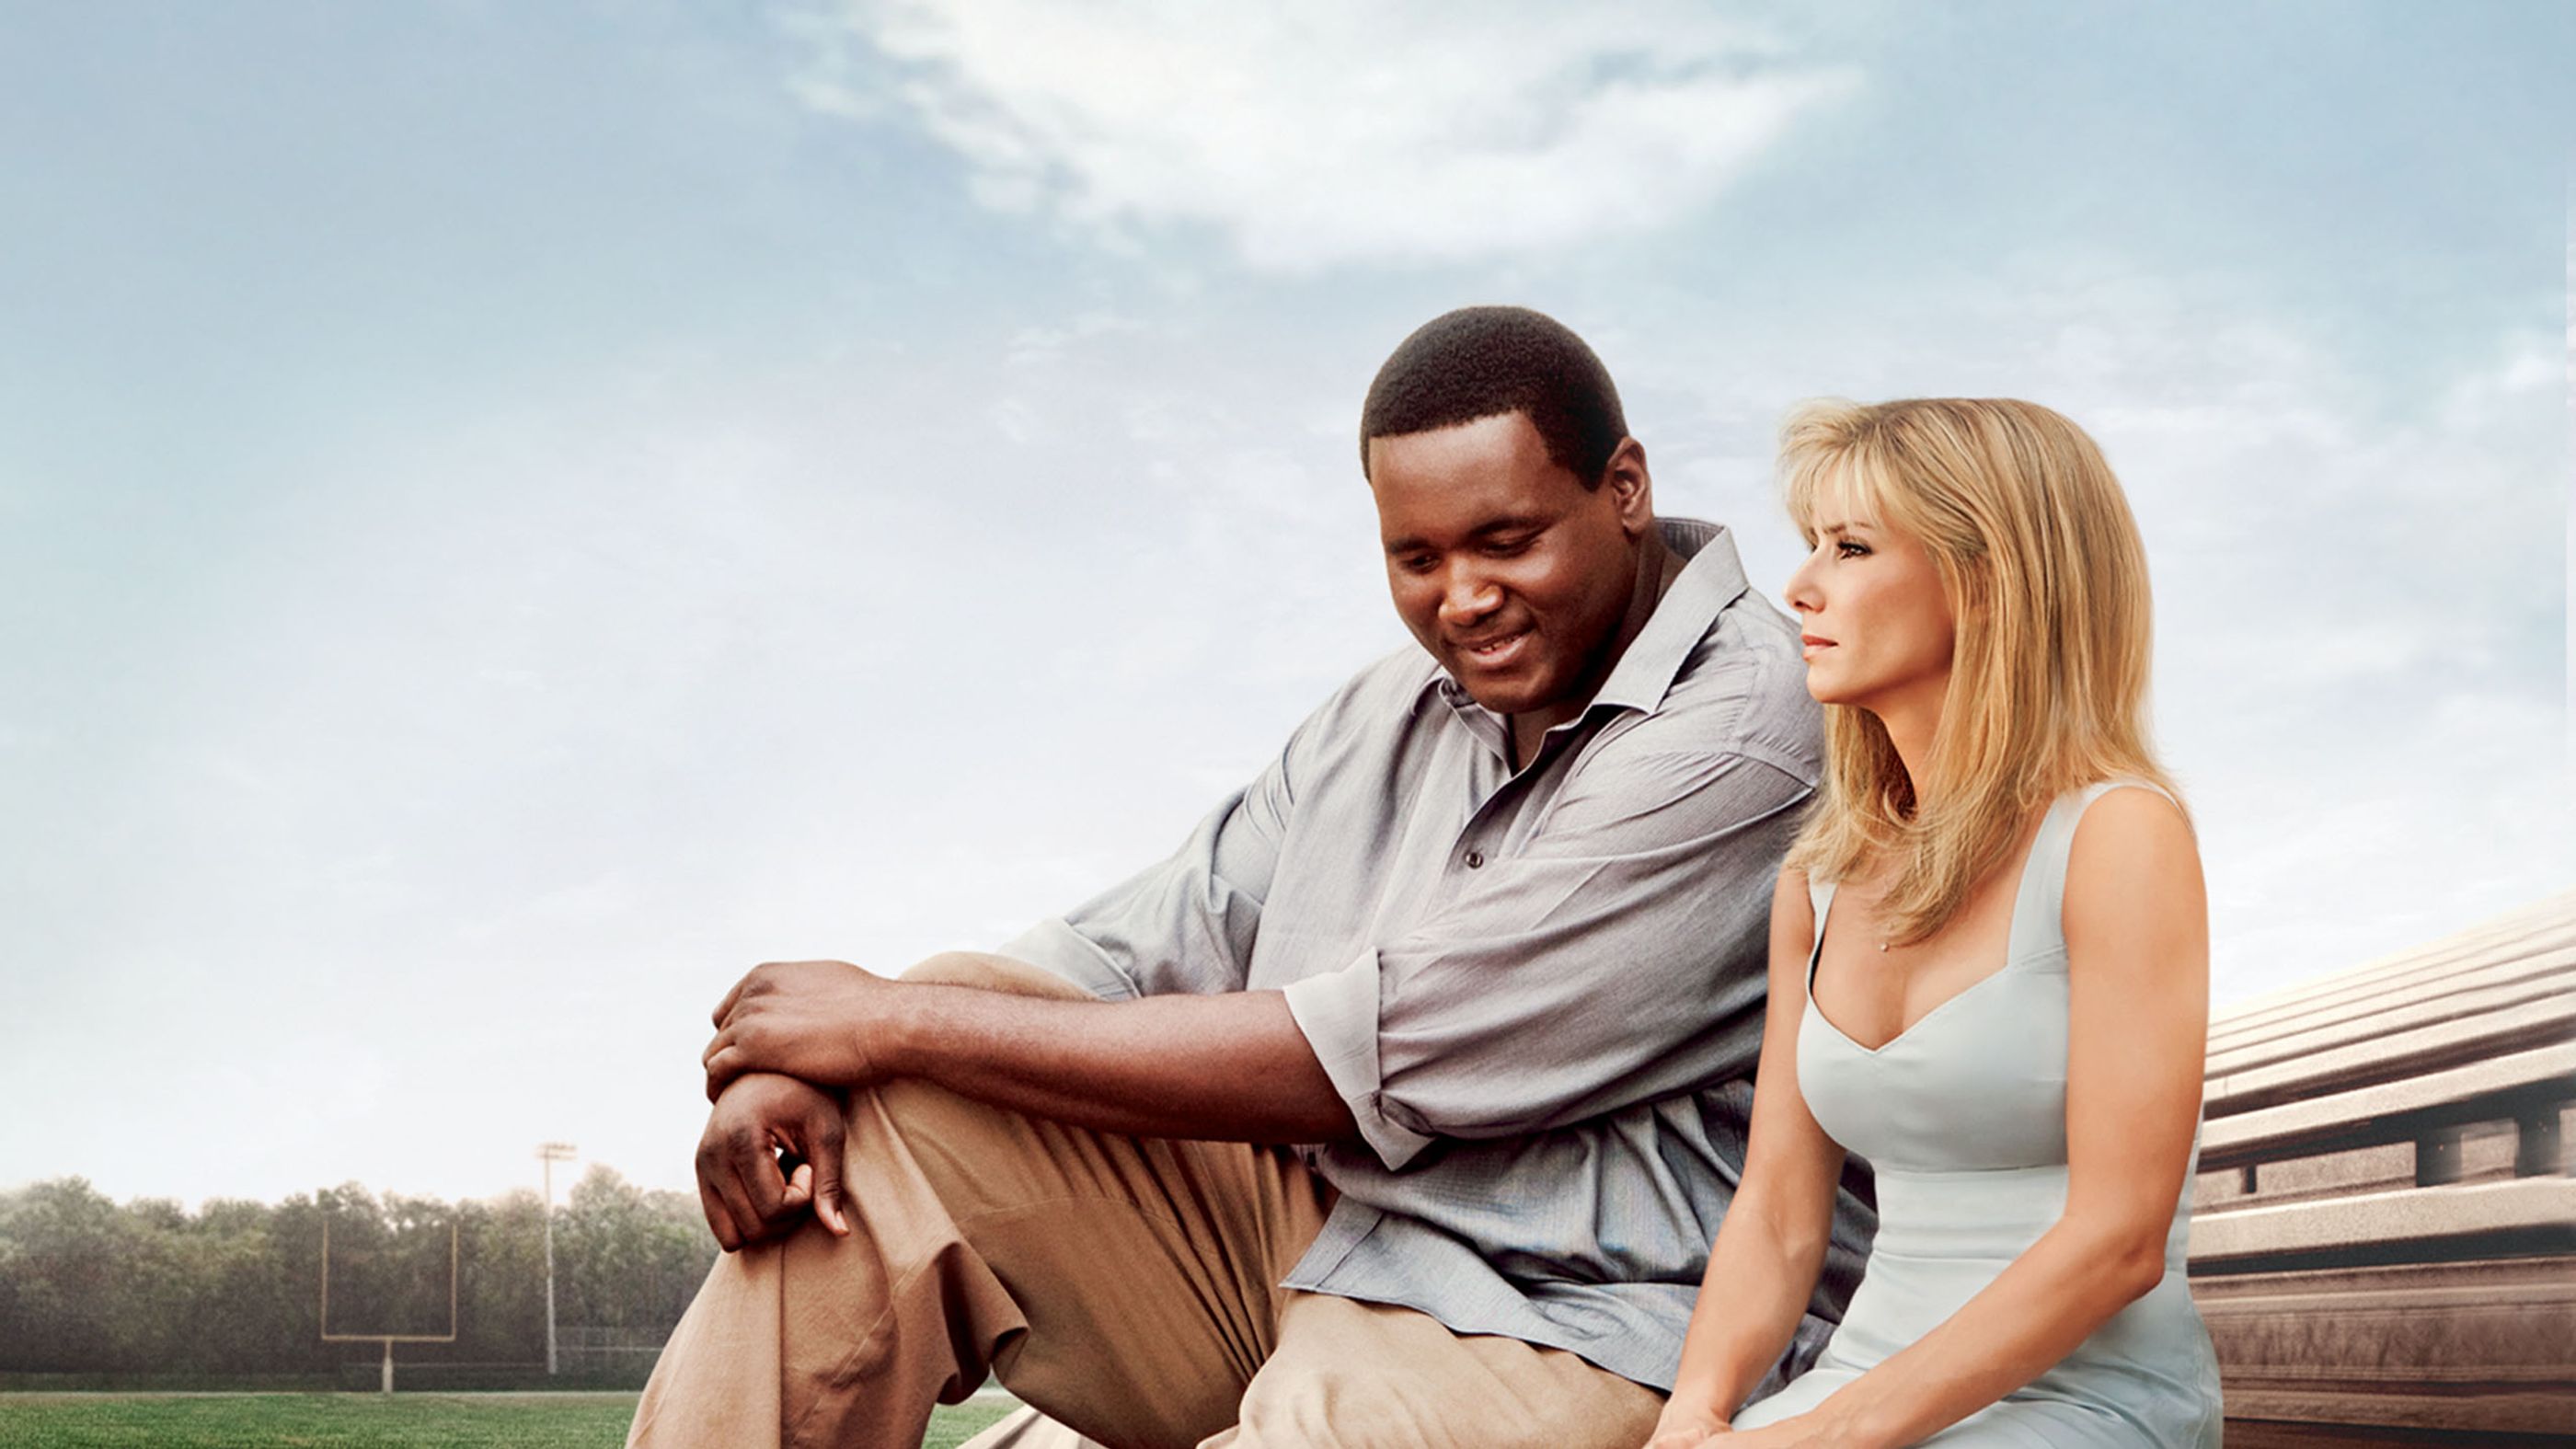 why is the blind side rated pg 13